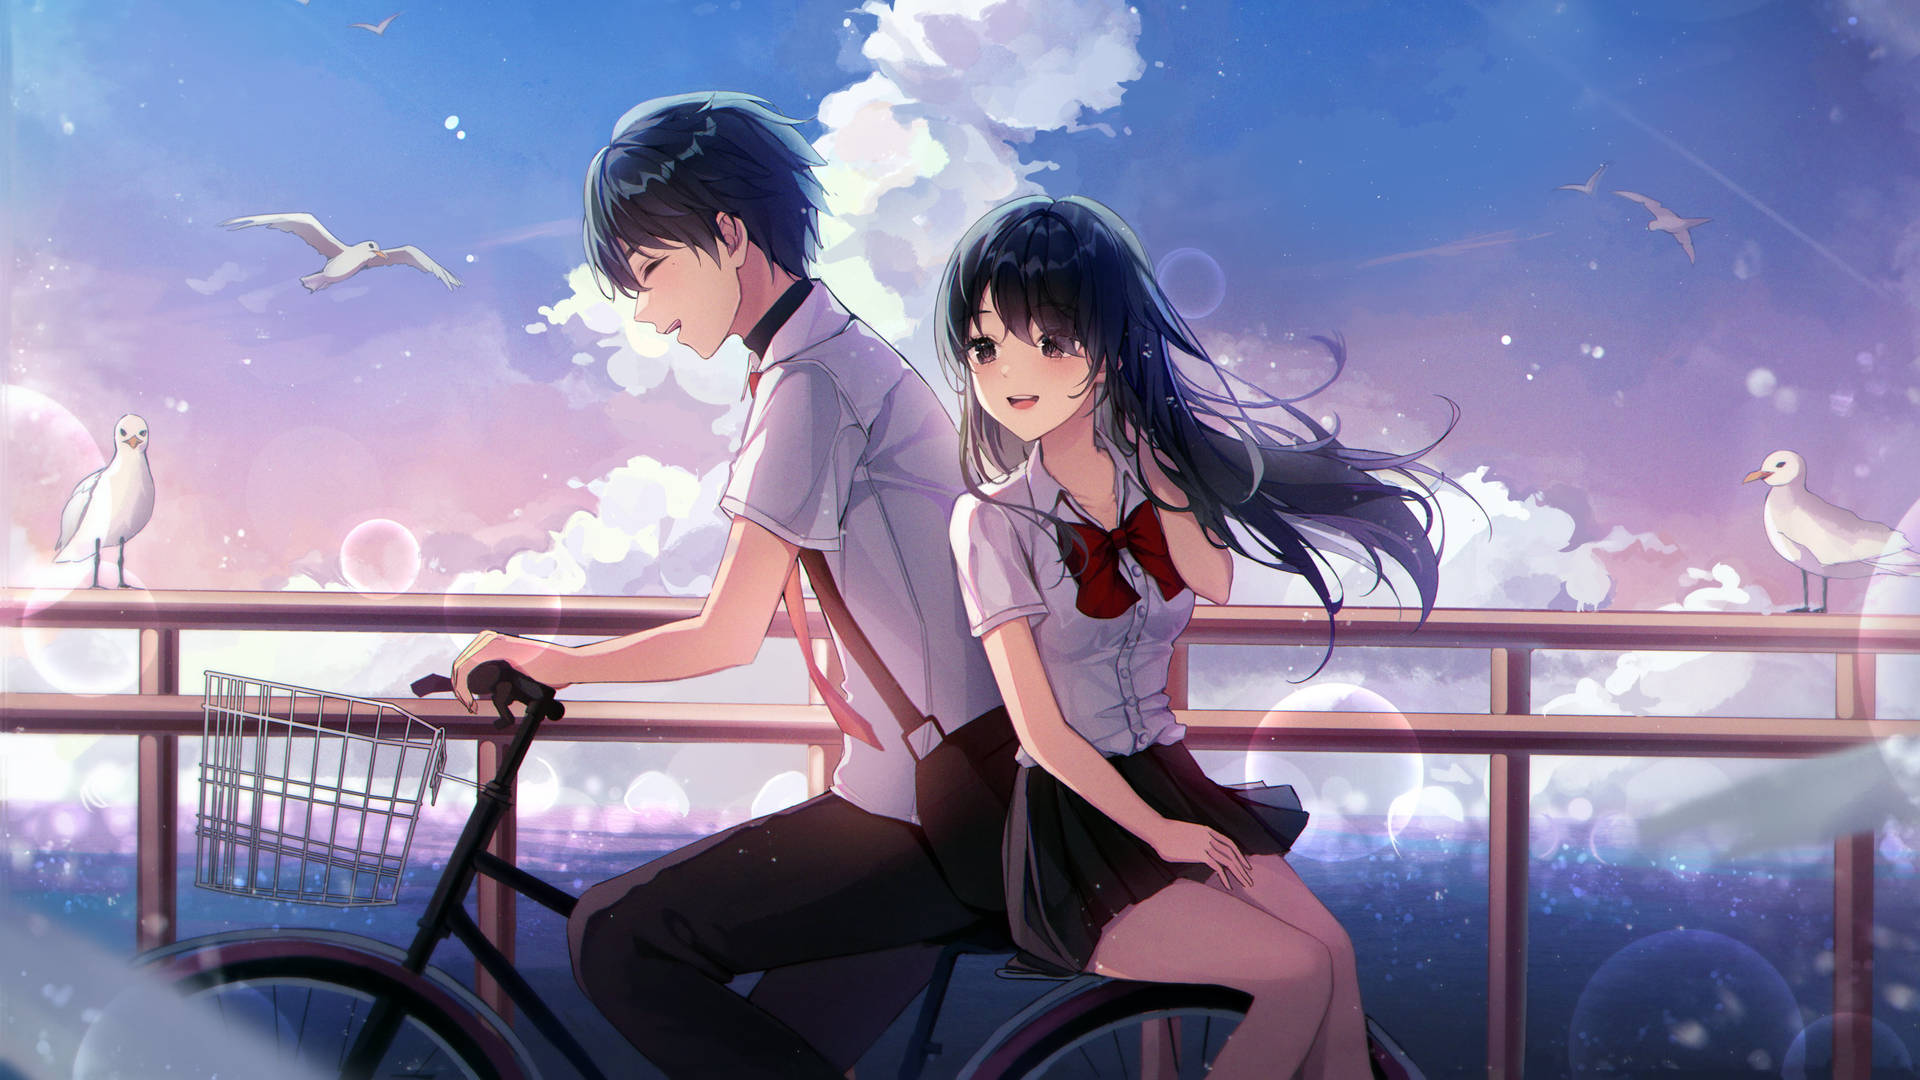 Download Cute Anime Couple Sharing A Bicycle Wallpaper 